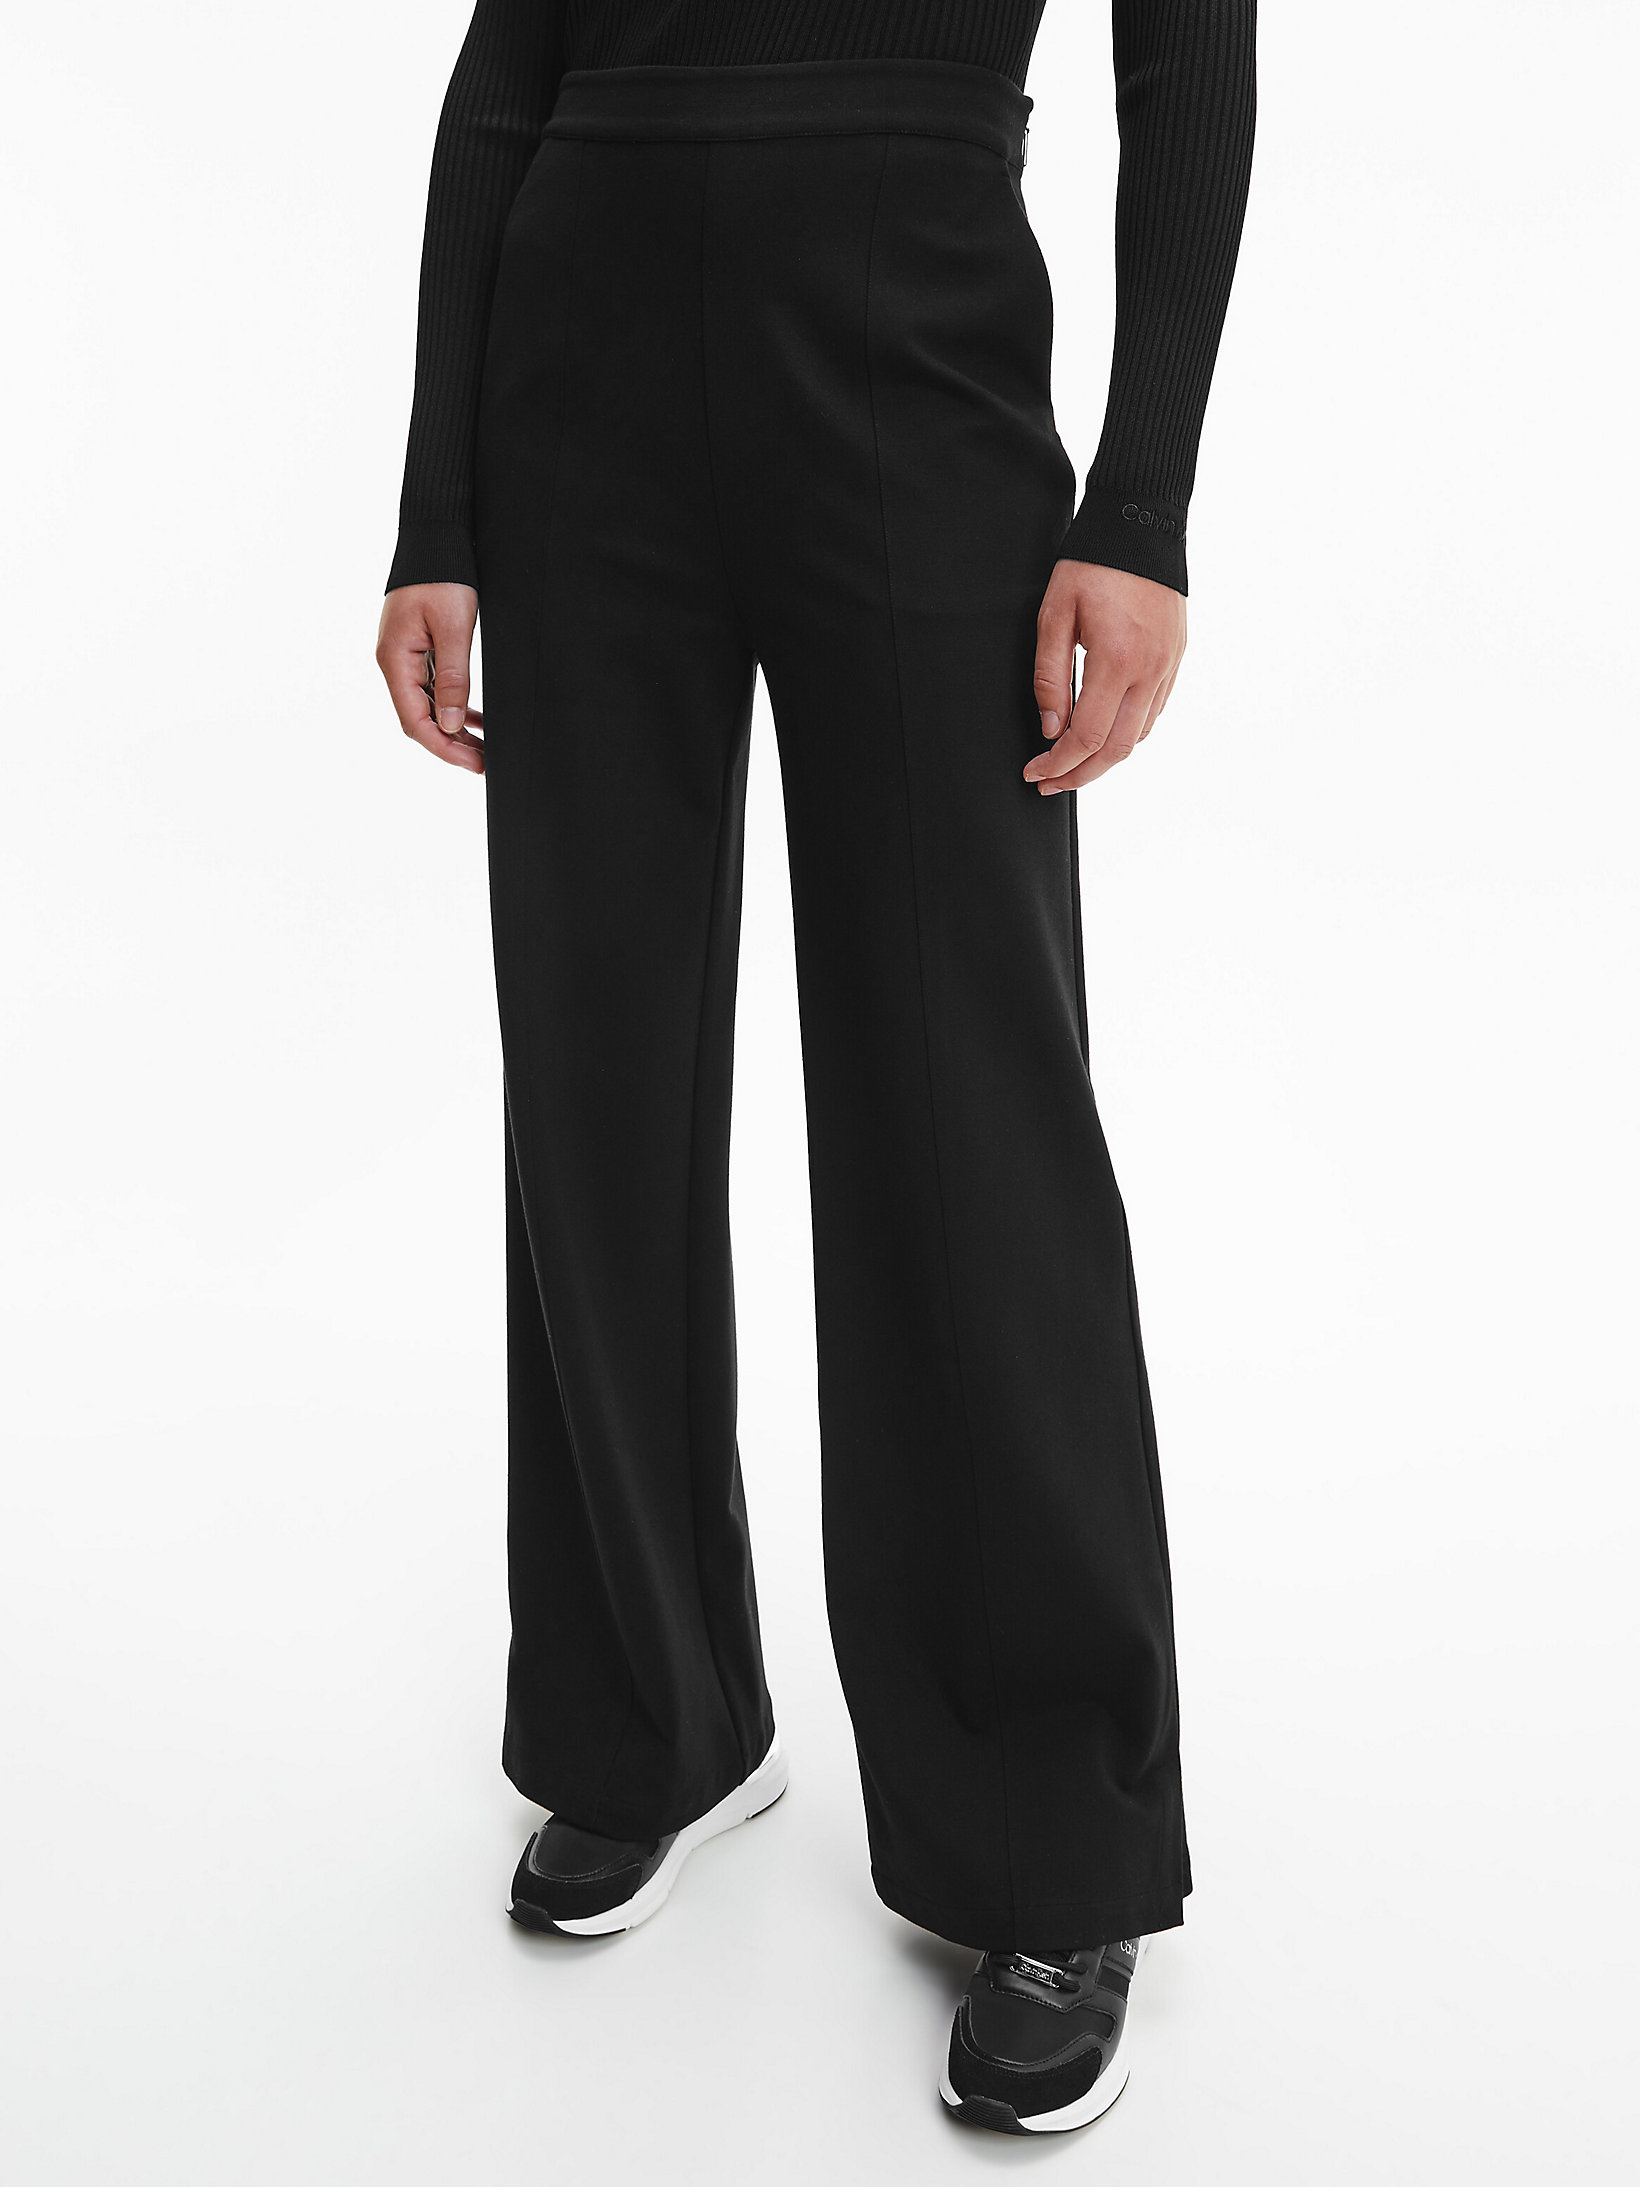 CK Black Recycled Wide Leg Trousers undefined women Calvin Klein